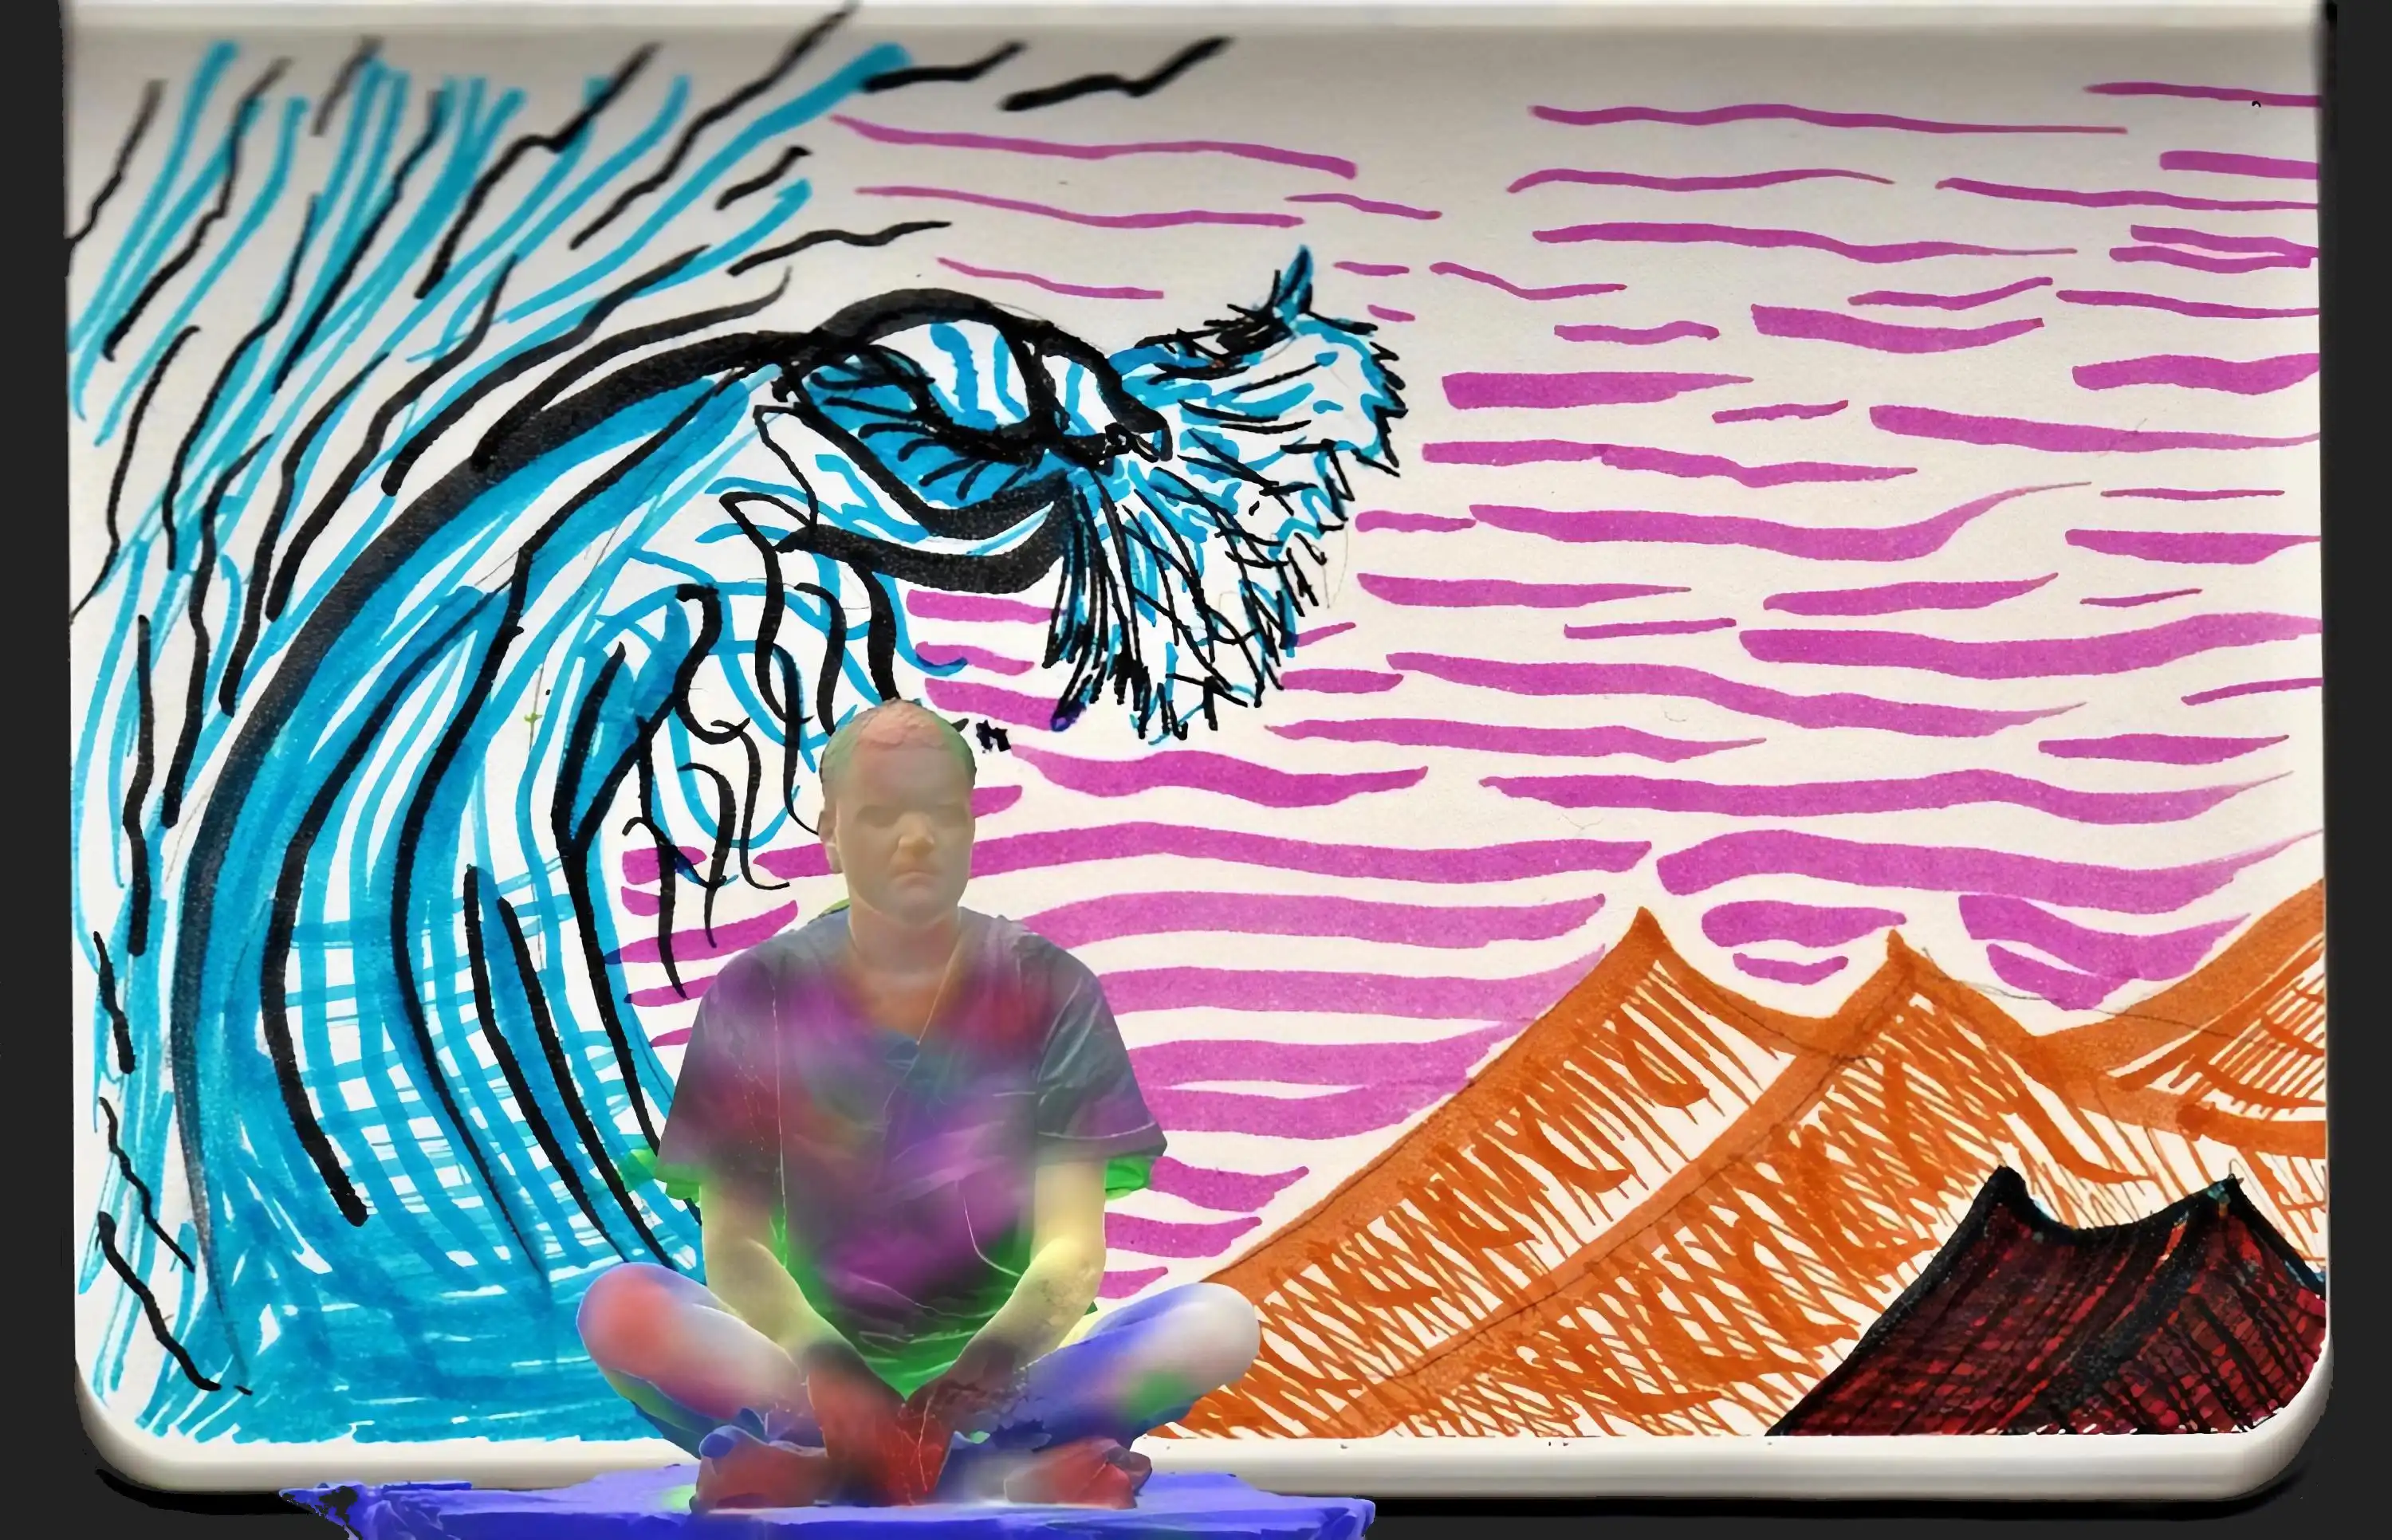 Brushed 3D scan meditating in front of a notebook page depicting a tsunami over a desert